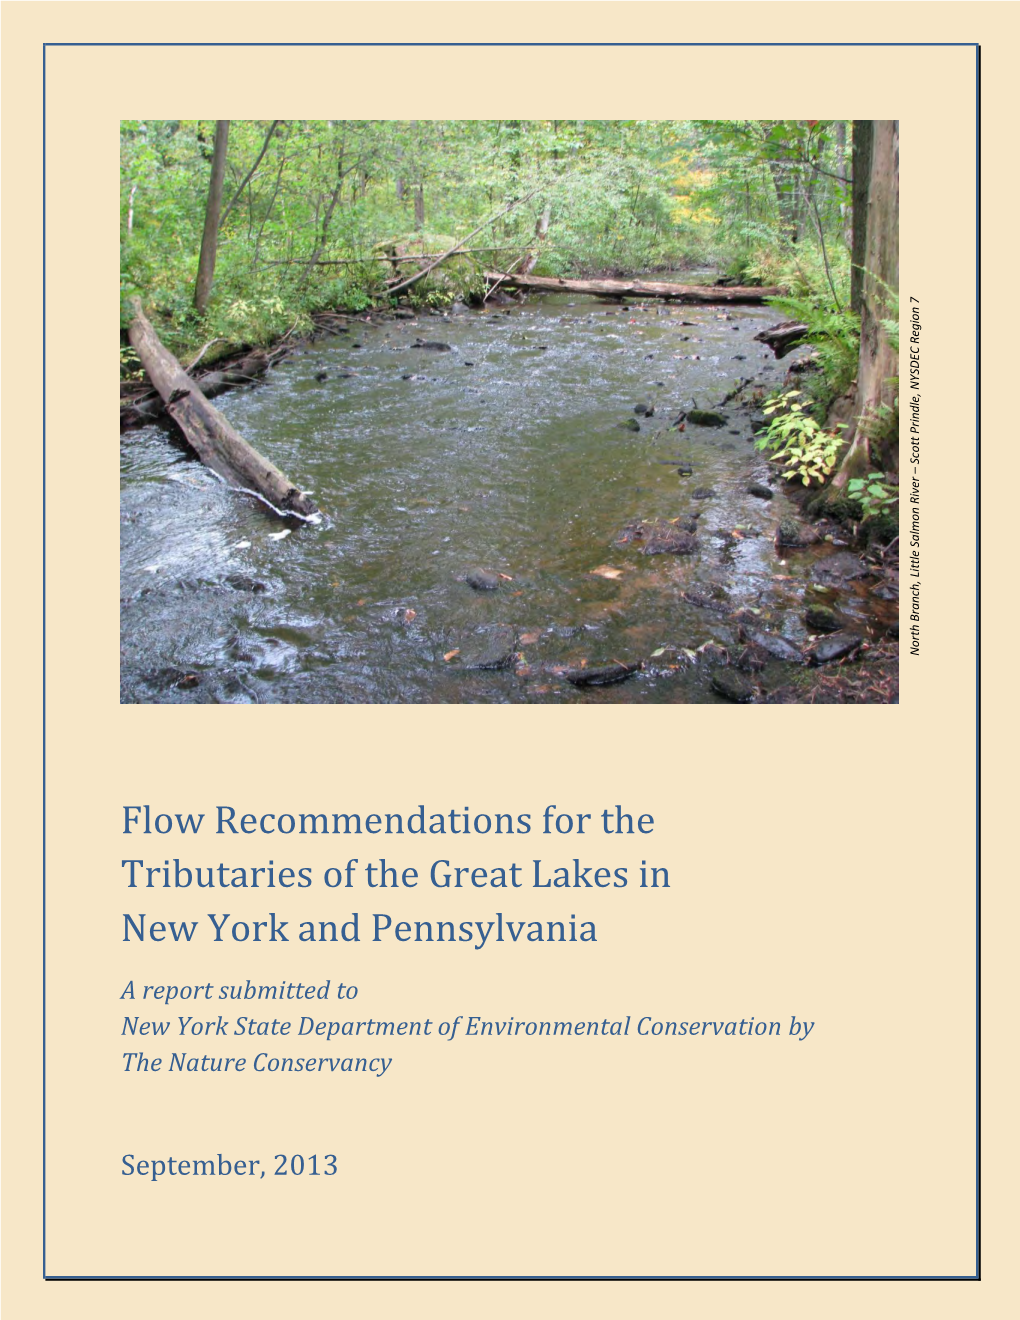 Flow Recommendations for the Tributaries of the Great Lakes in New York and Pennsylvania